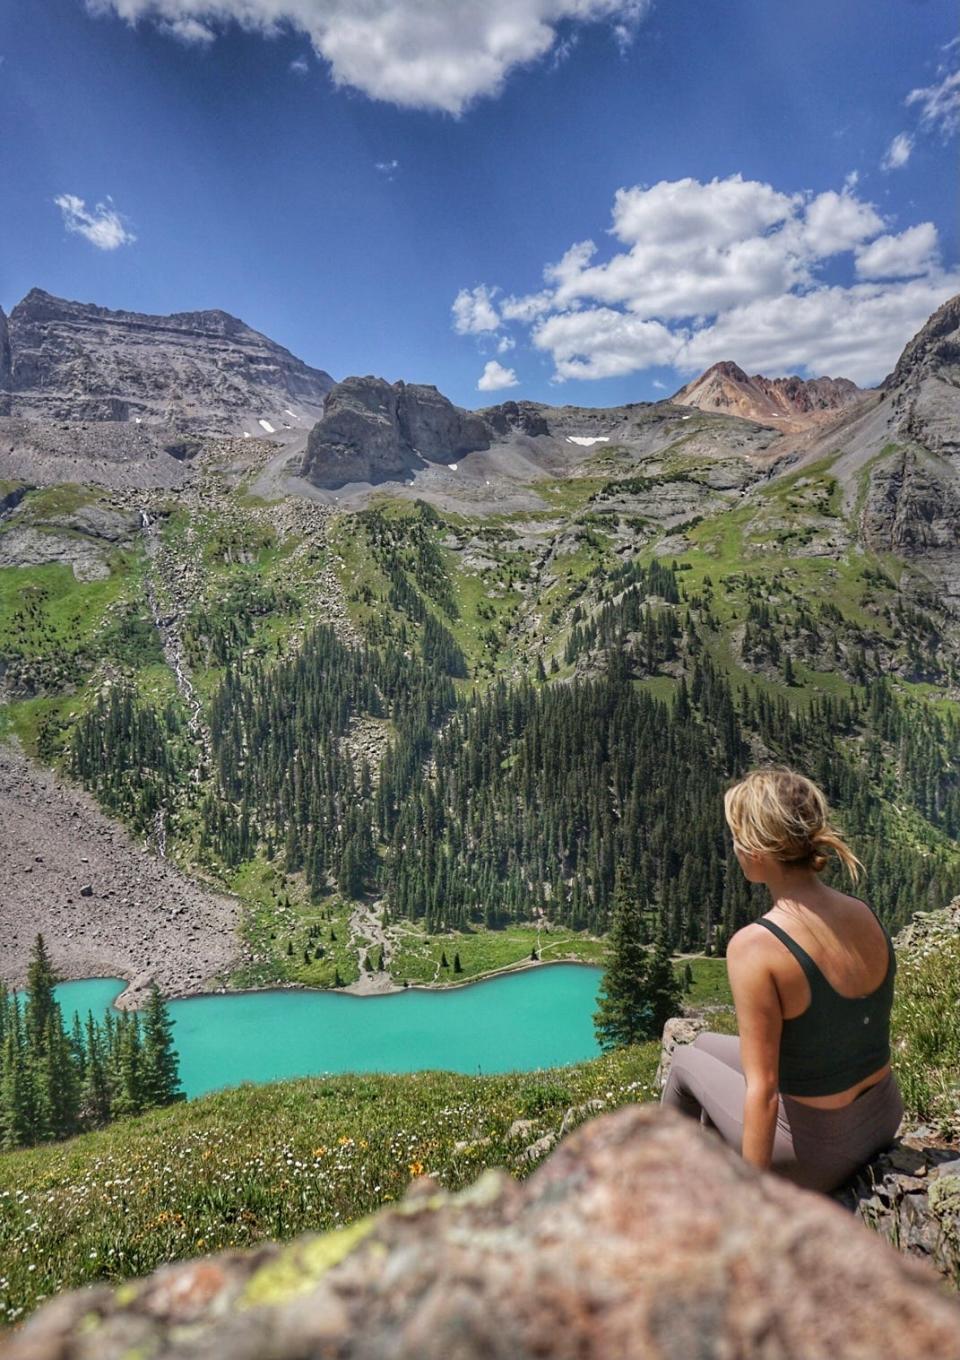 A woman with her back to the camera facing a blue lake, mountains, and trees.